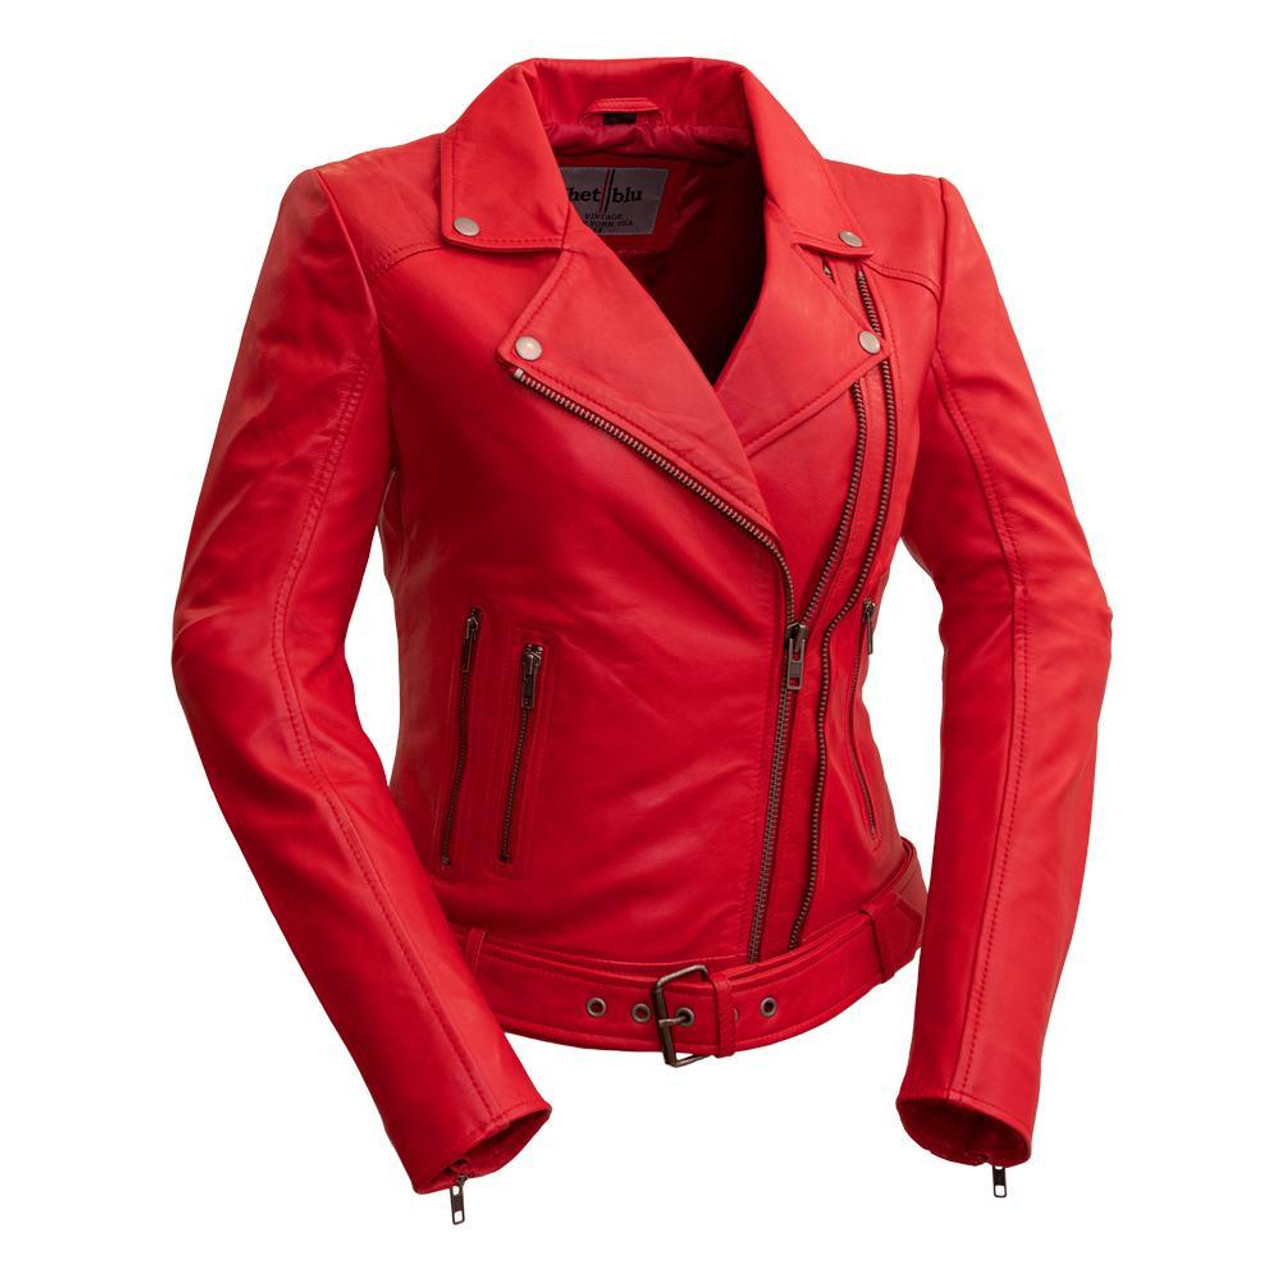 Womens Ruby Red Motorcycle Leather Jacket - Shopperfiesta